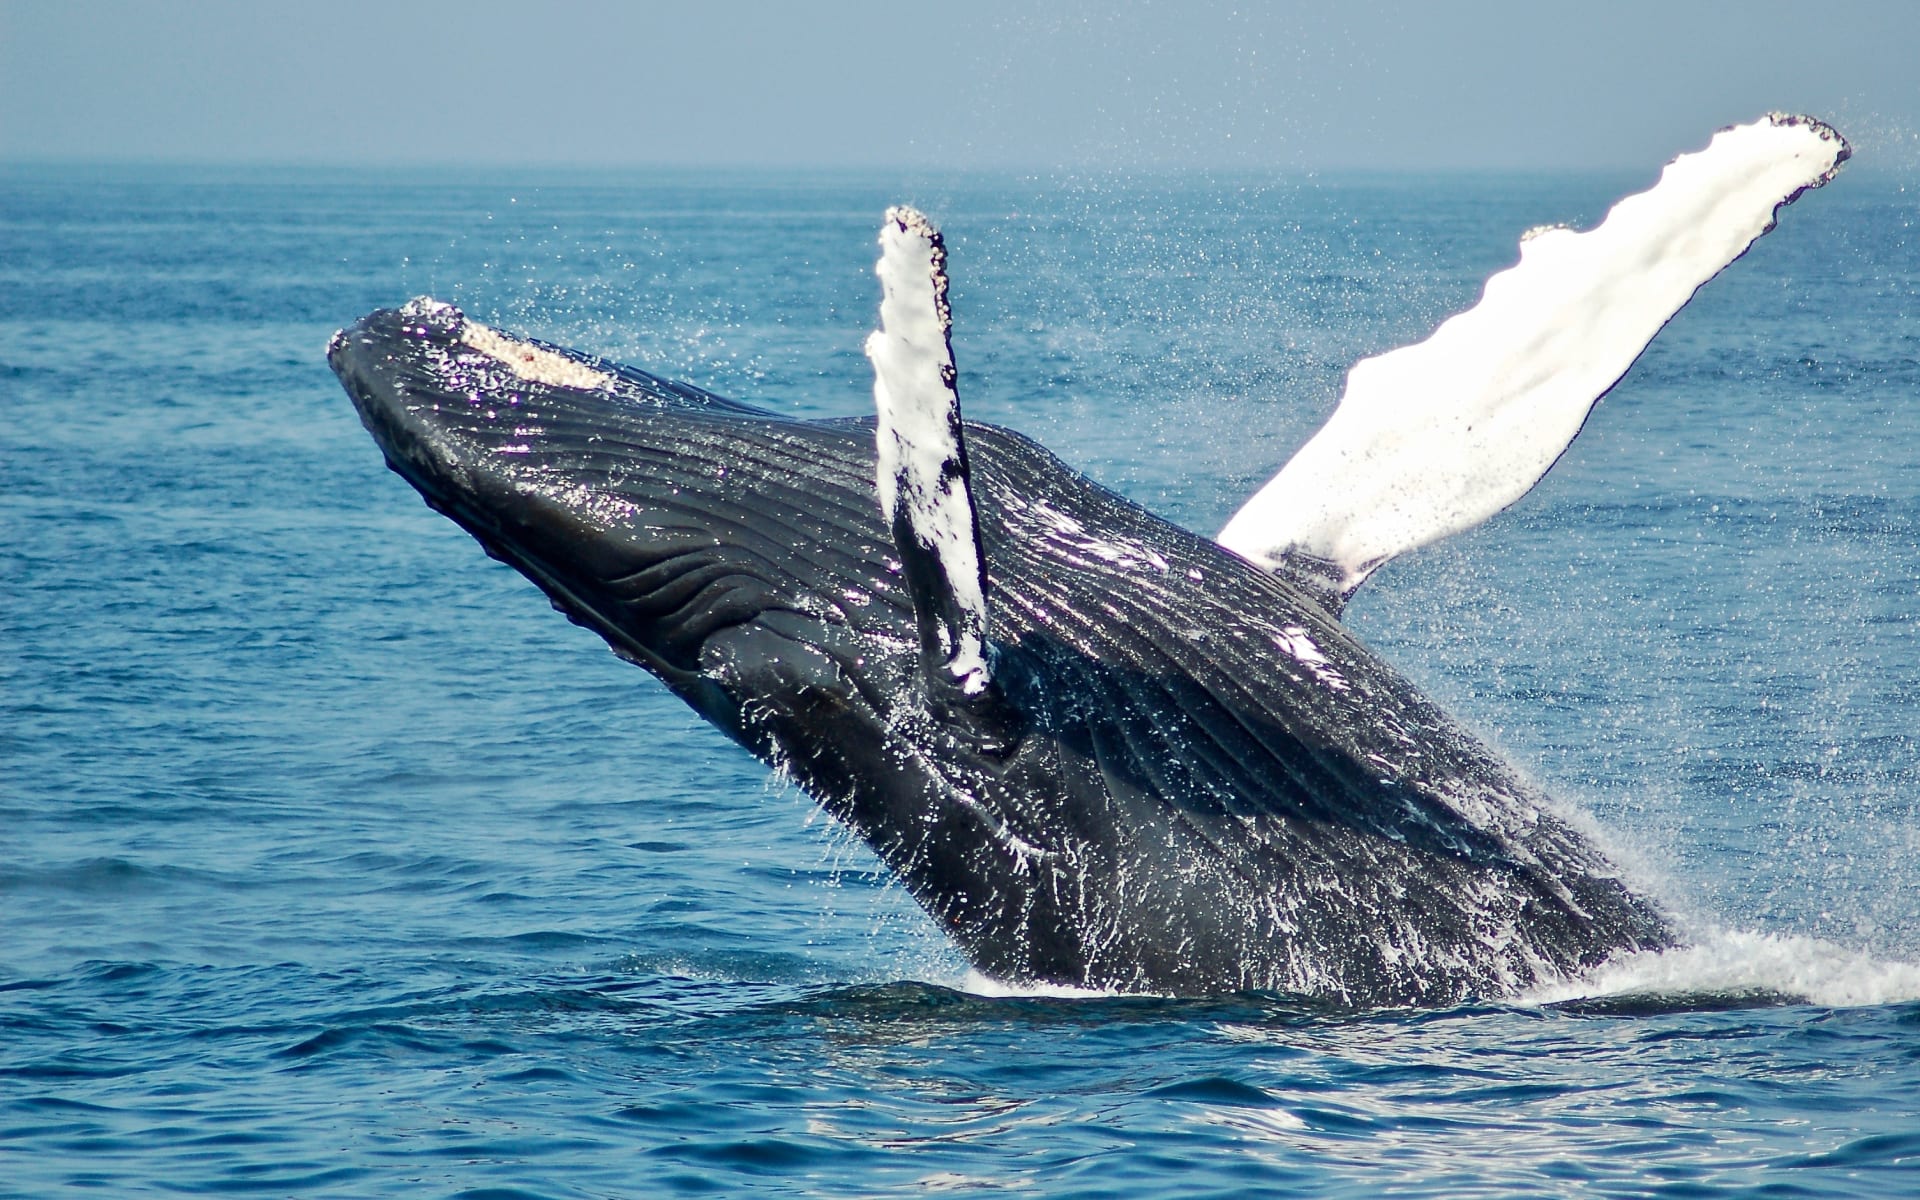 Whale Free Stock Image Unslpash 2019 CCTodd Cravens LwACYK8ScmA Owh1ph ?width=1920&height=1200&name=Whale Free Stock Image Unslpash 2019 CCTodd Cravens LwACYK8ScmA Owh1ph 